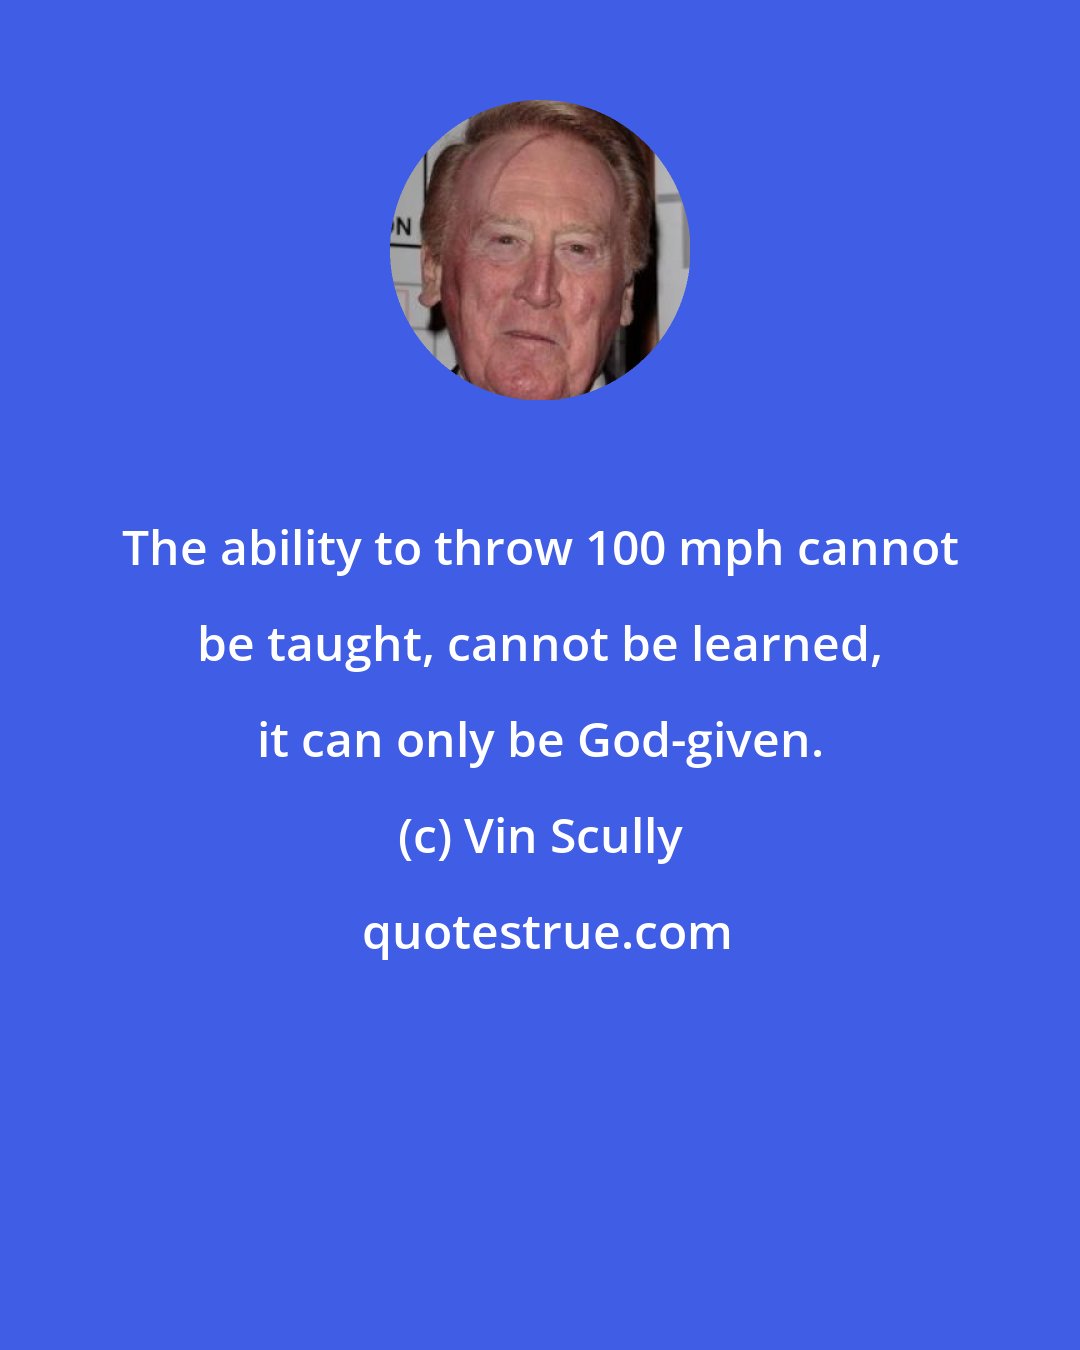 Vin Scully: The ability to throw 100 mph cannot be taught, cannot be learned, it can only be God-given.